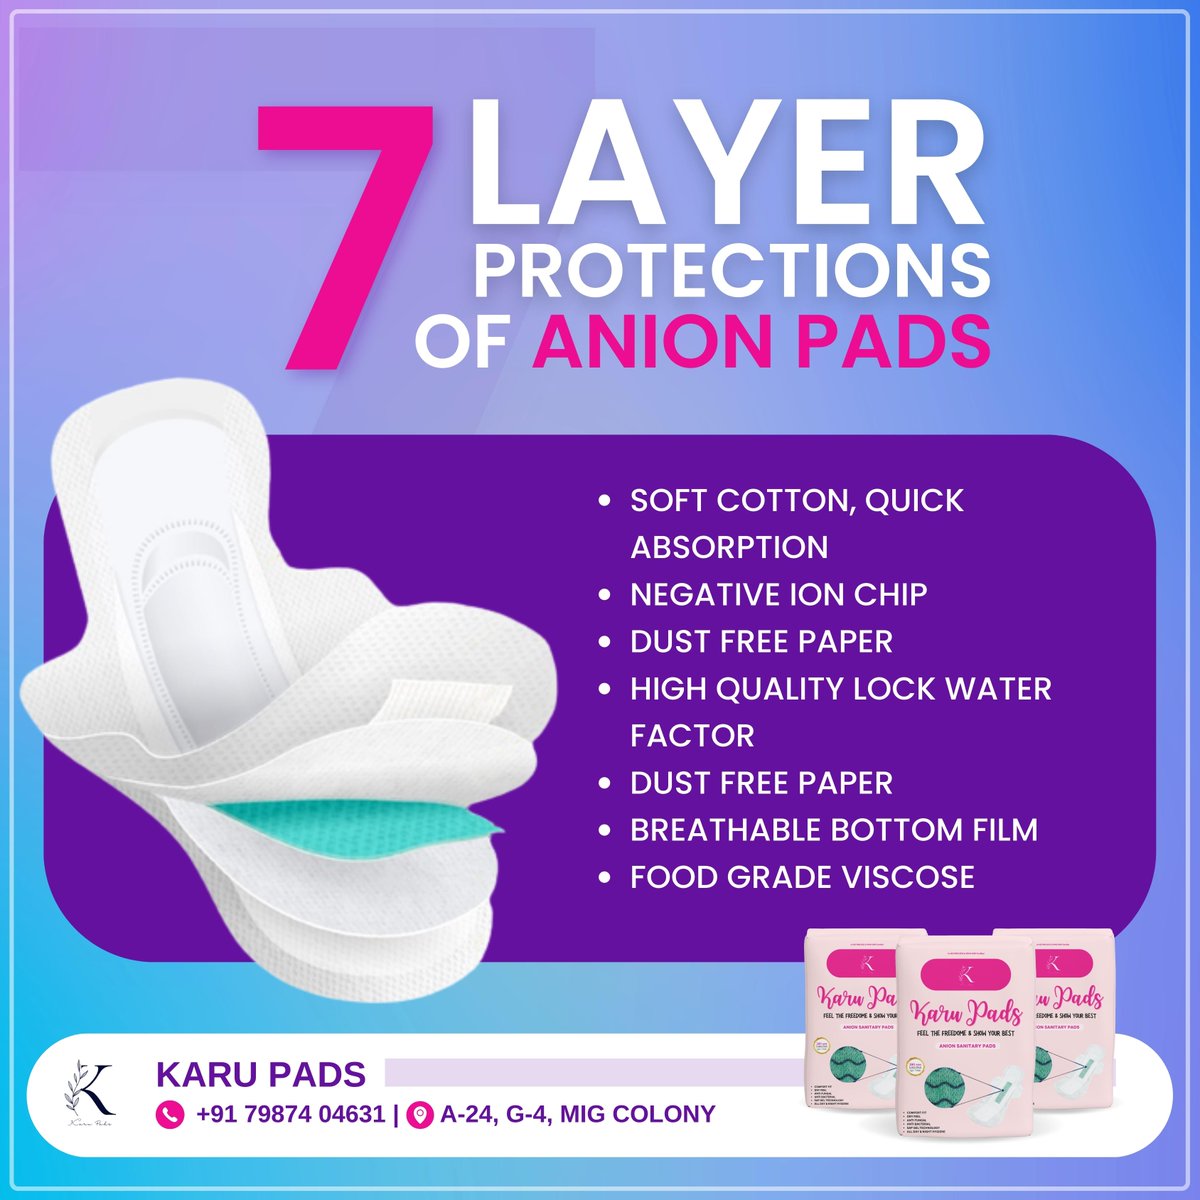 7 Layers Protections of Anion Pads
-Soft cotton, quick absorption
-Negative ion chip
-Dust free paper
-High quality lock water factor
-Dust free paper
-Breathable bottom film
-Food grade viscose

#AnionPads #karu #sanitarypads #pads #womenshealth #KaruPads #health #anion #periods